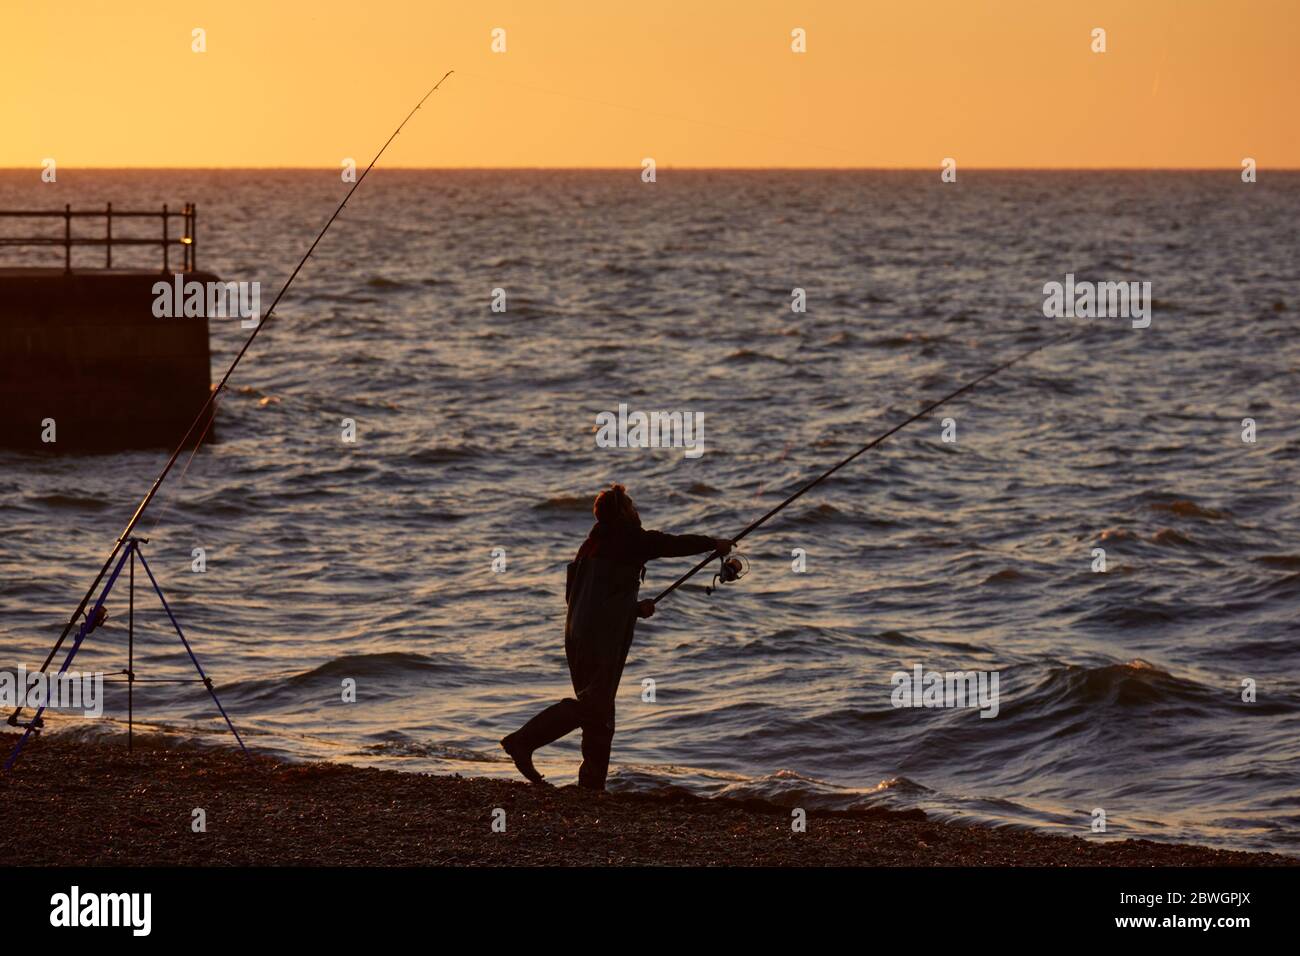 Hampton Pier, Herne Bay, Kent, UK. 1st June 2020: UK Weather. Sunset at Hampton pier as anglers take advantage of the relaxed lockdown rules and the good weather to indulge in some fishing as the tide comes in. Credit: Alan Payton/Alamy Live News Stock Photo